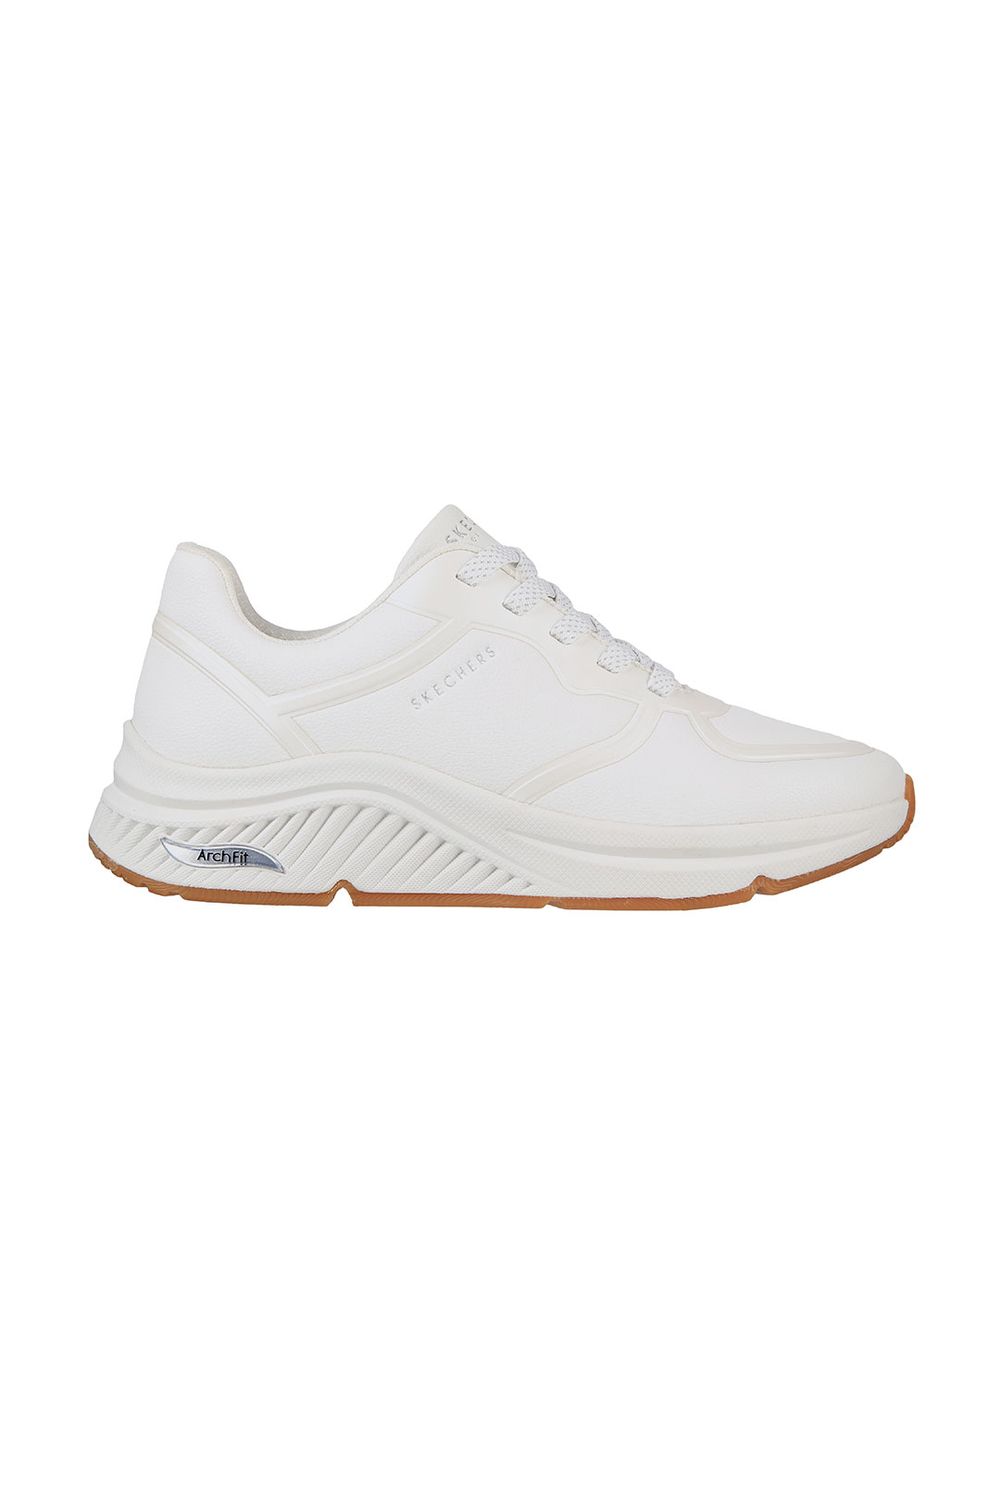 SKECHERS T. CASUAL D. ARCH FIT S-MILES